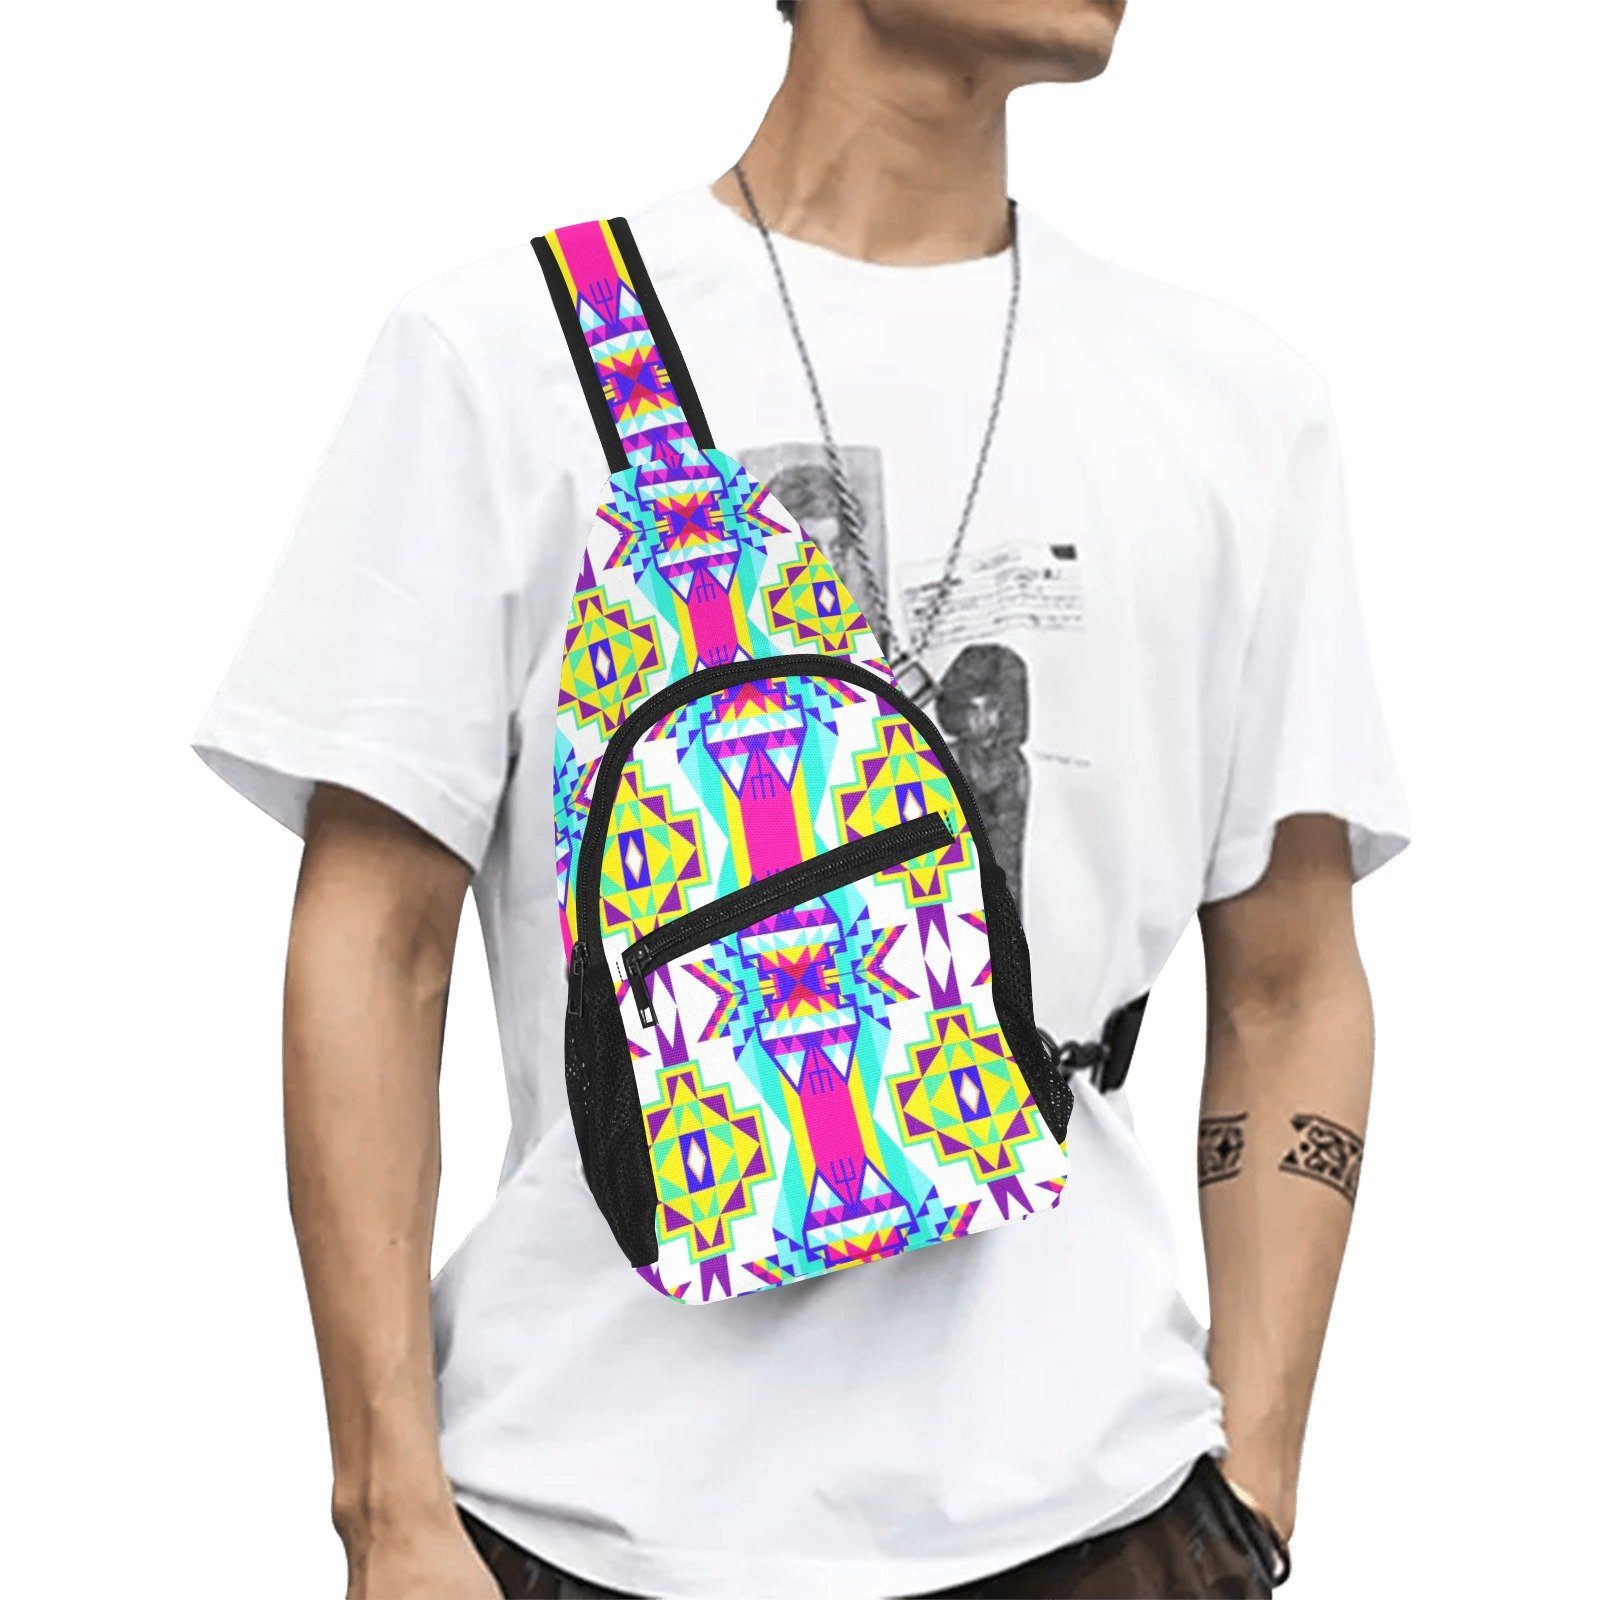 Fancy Champion All Over Print Chest Bag (Model 1719) All Over Print Chest Bag (1719) e-joyer 